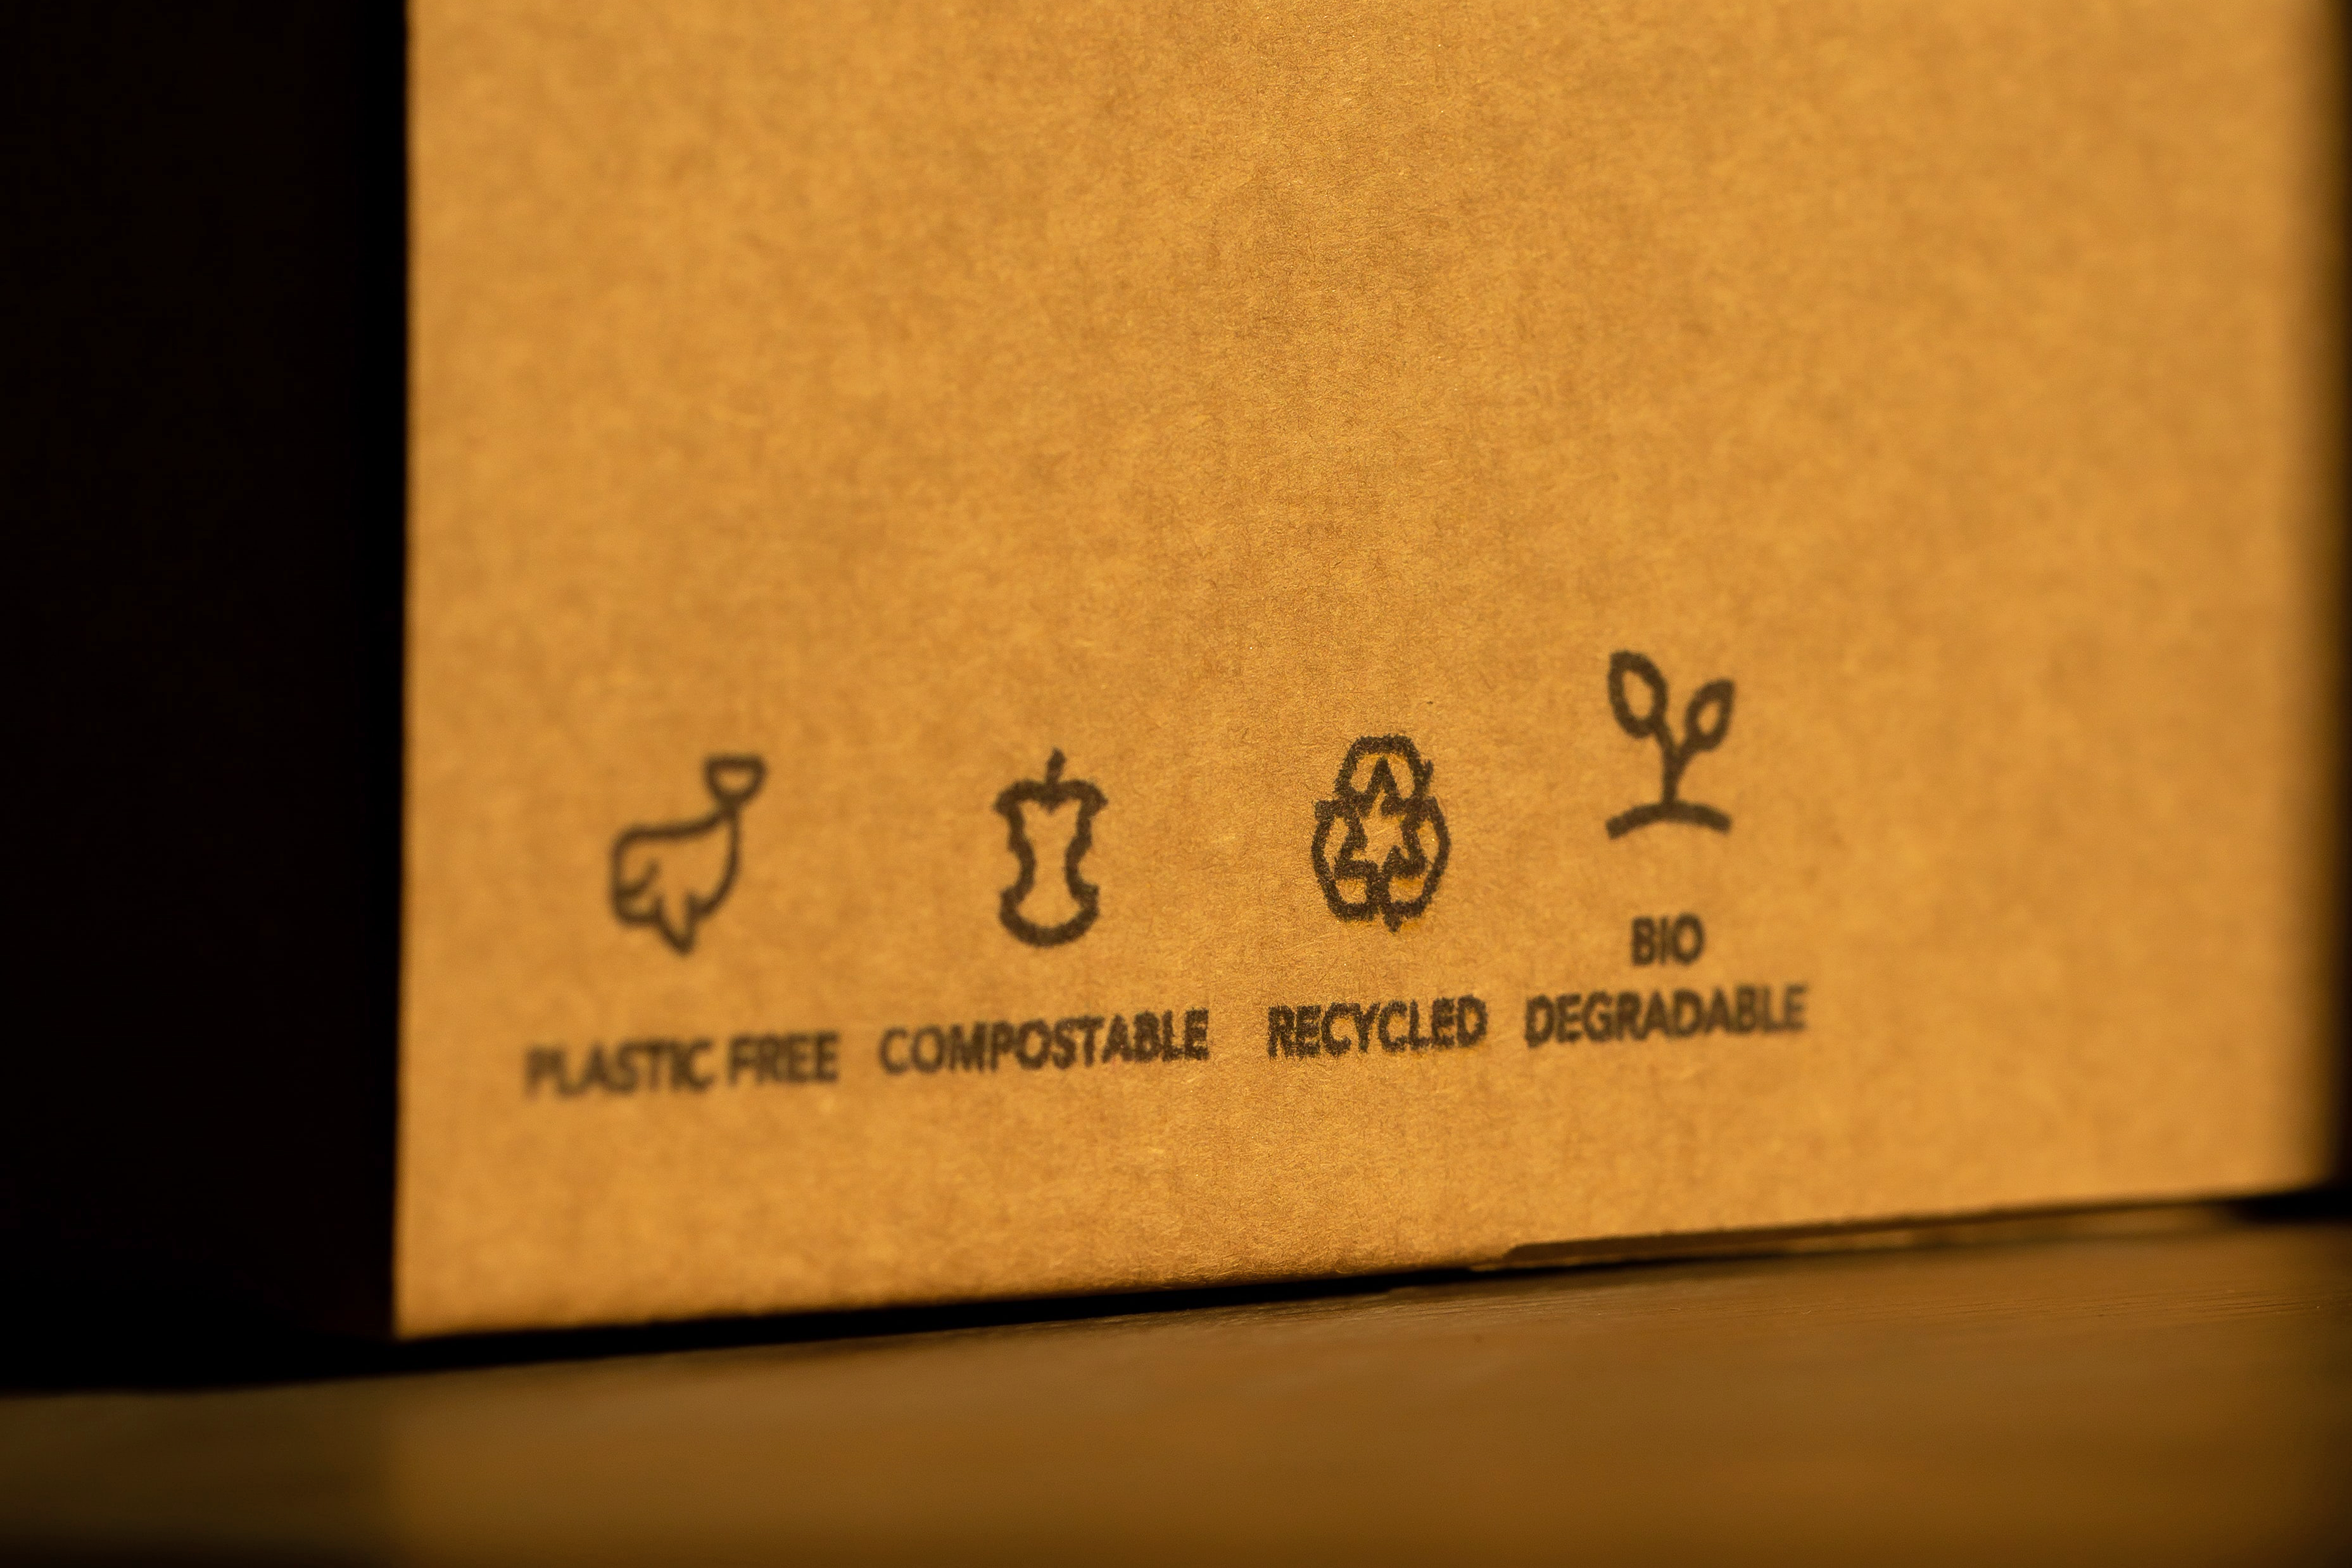 Image shows a cardboard box with sustainability icons reading plastic free, compostable, recycled, and biodegradable